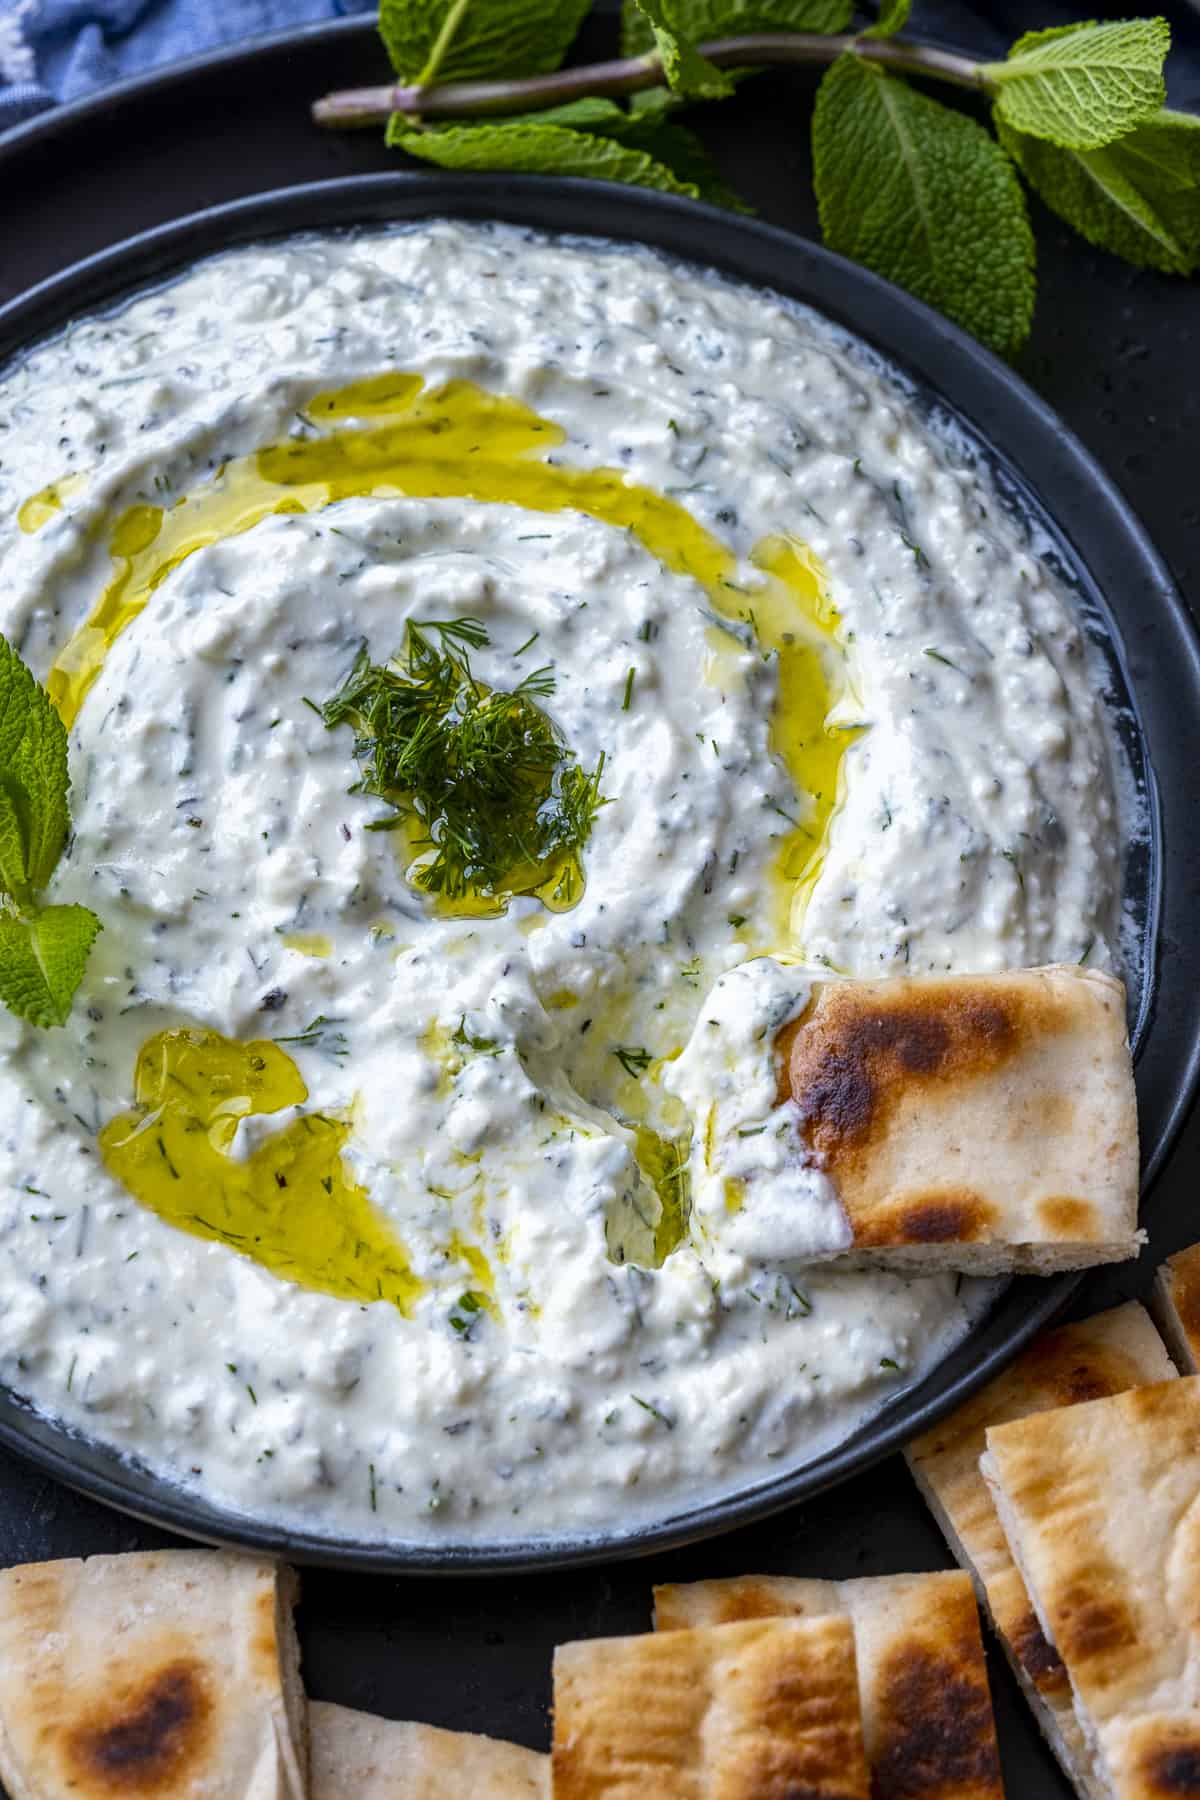 Haydari dip garnished with olive oil and fresh dill on a black plate. A slice of pita bread dipped into it.